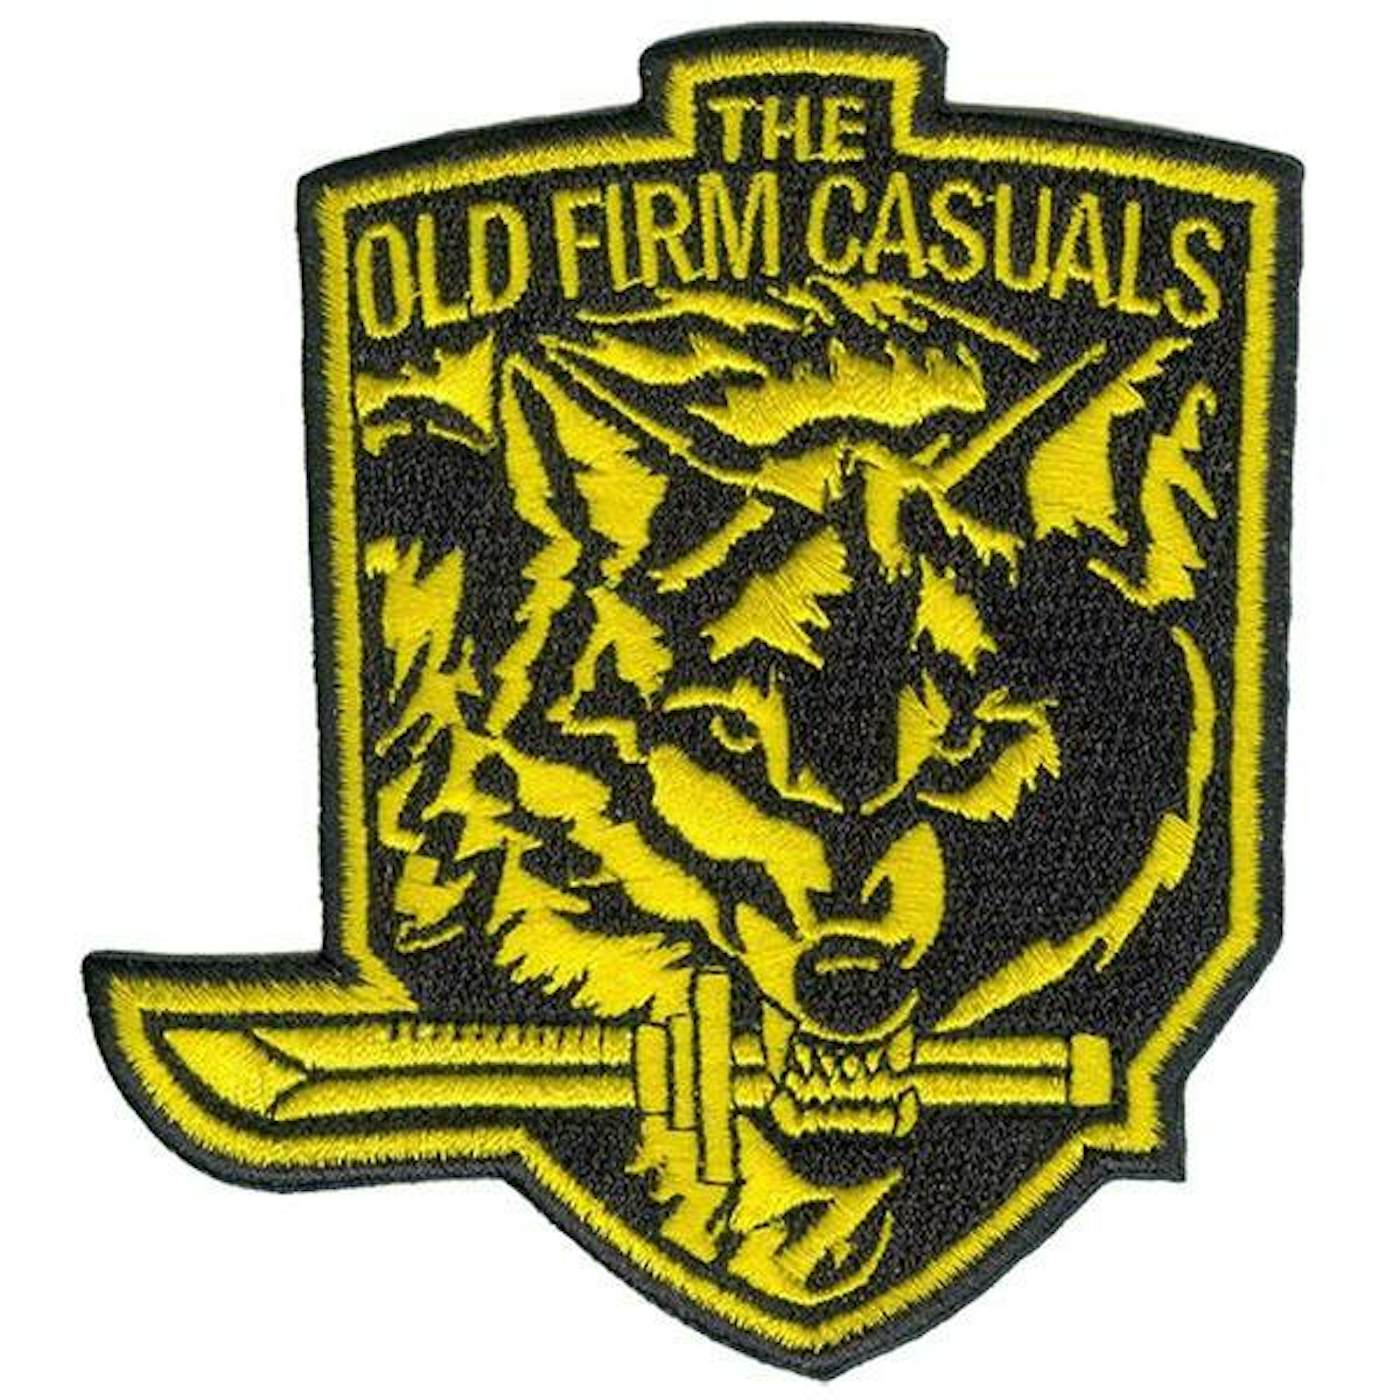 The Old Firm Casuals - Wolf Knife - Patch - Embroidered - 4" x 3.5"